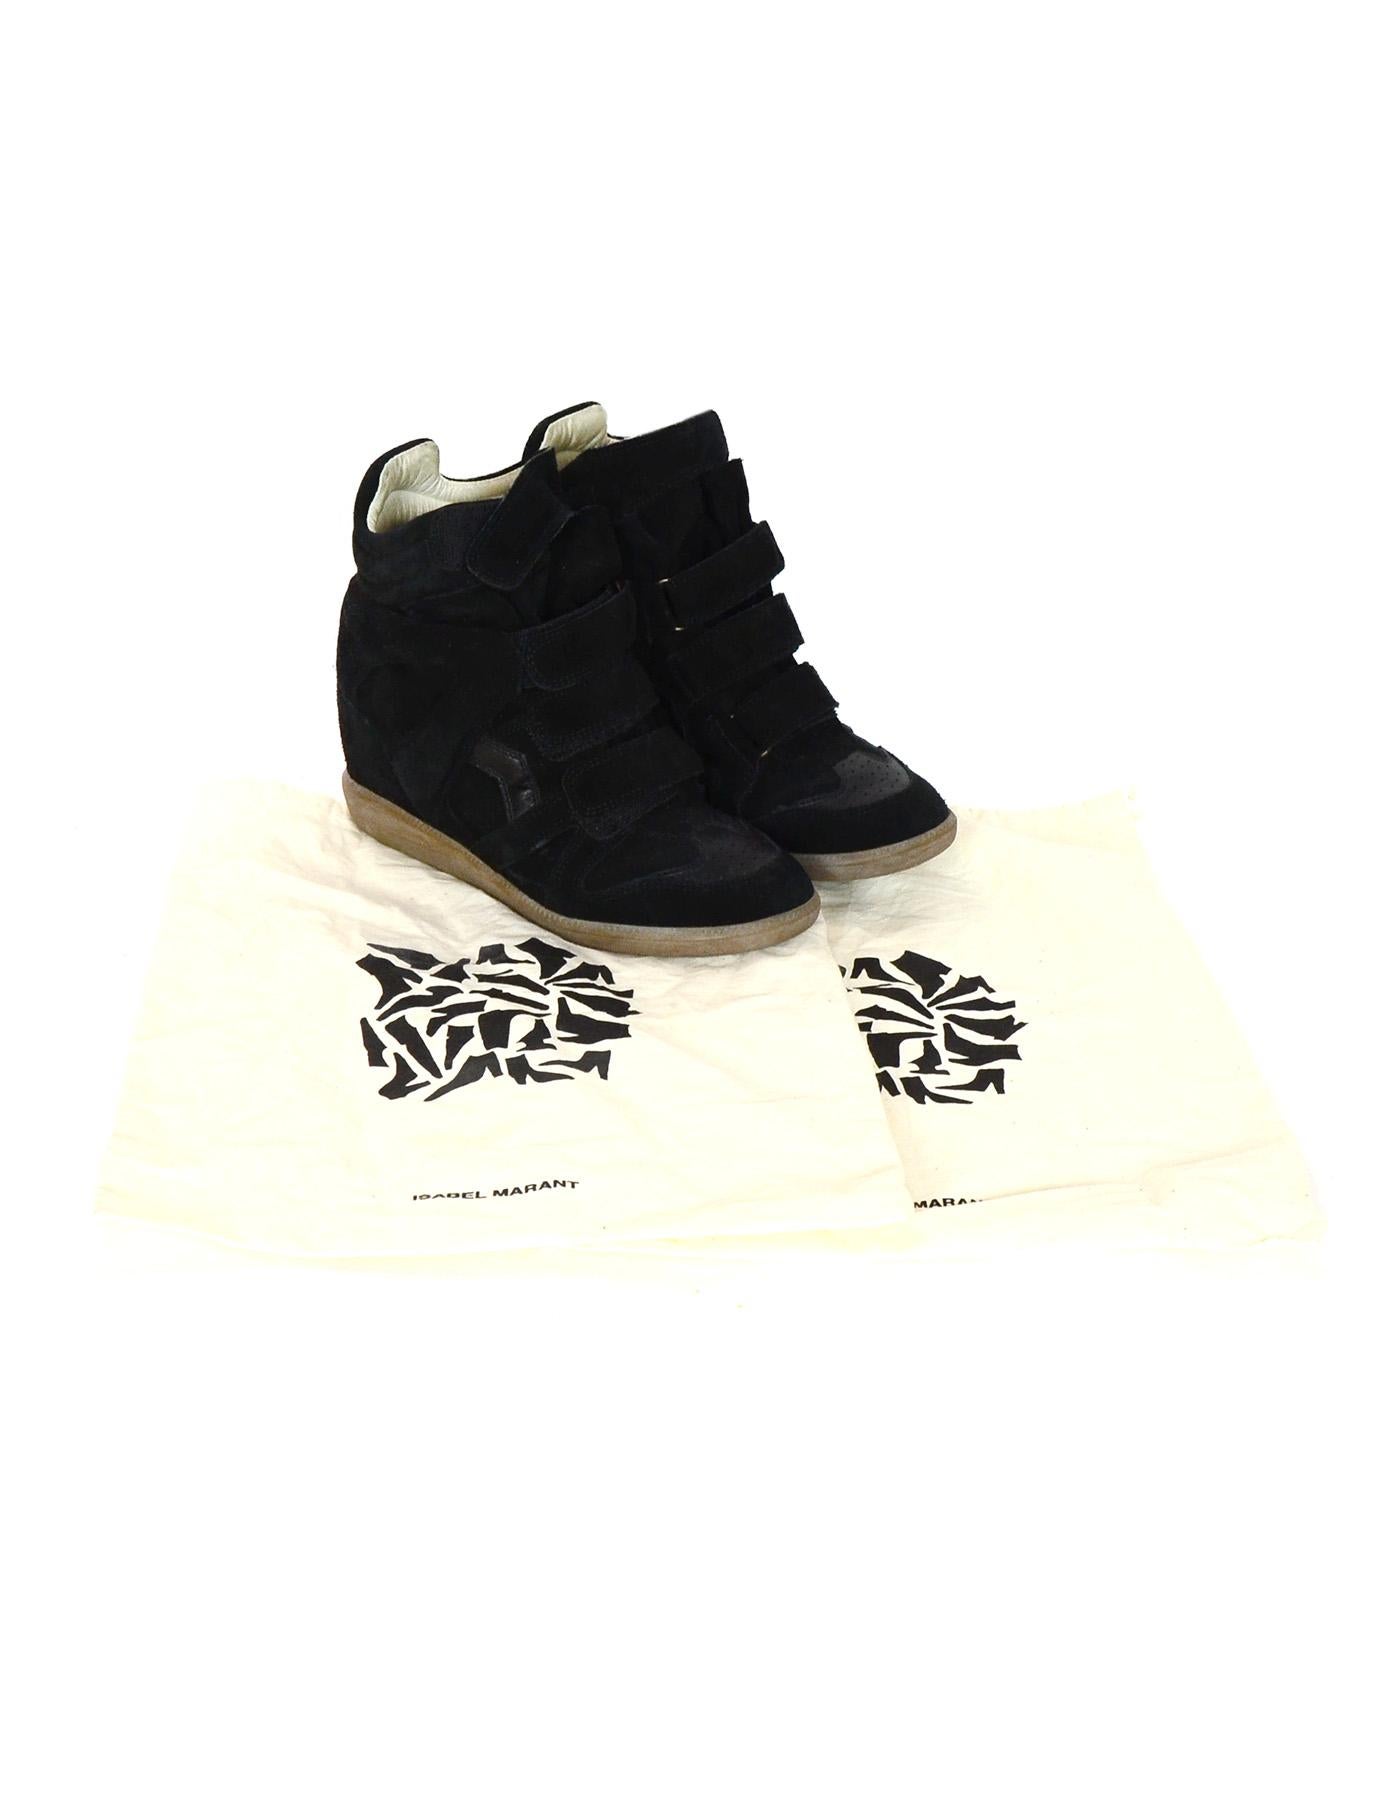 Isabel Marant Black Suede Beckett Wedge Sneakers Sz 38

Color: Black
Materials: Leather, suede
Closure/Opening: Velcro closure
Overall Condition: Excellent pre-owned condition with the exception of minor wear in suede
Retail Price: $600+